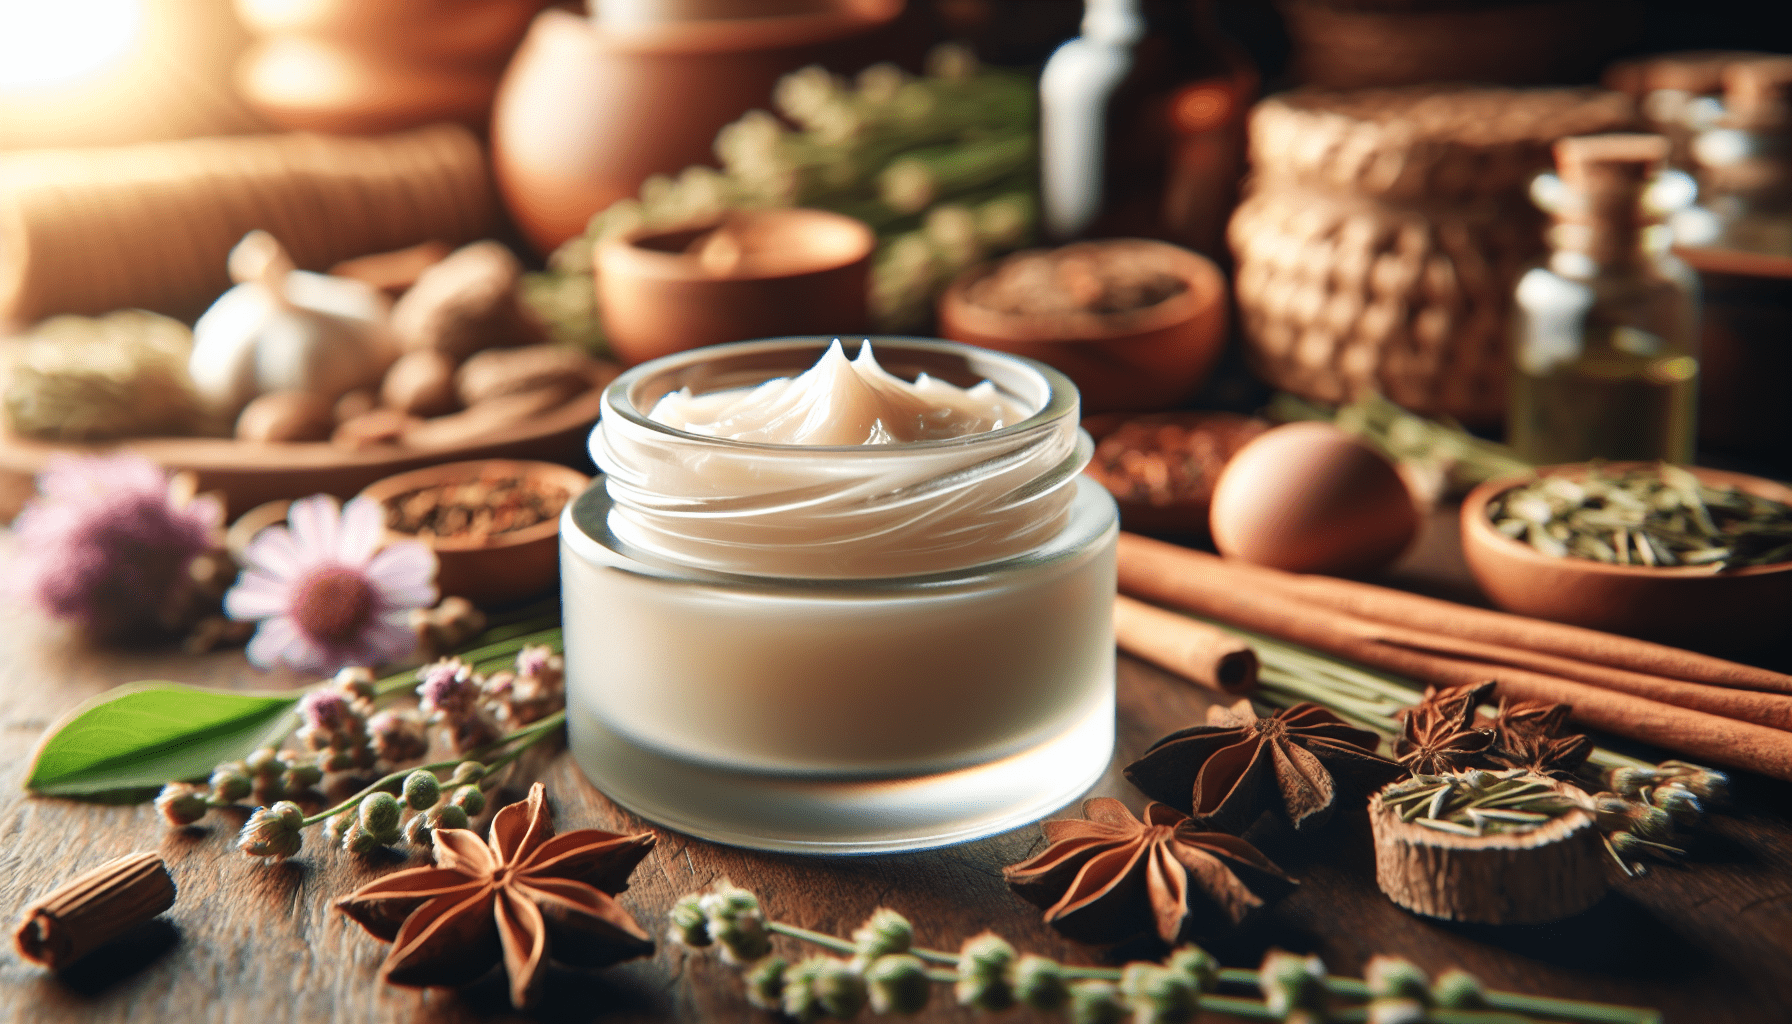 How To Make Your Own Natural Pain Relief Salve